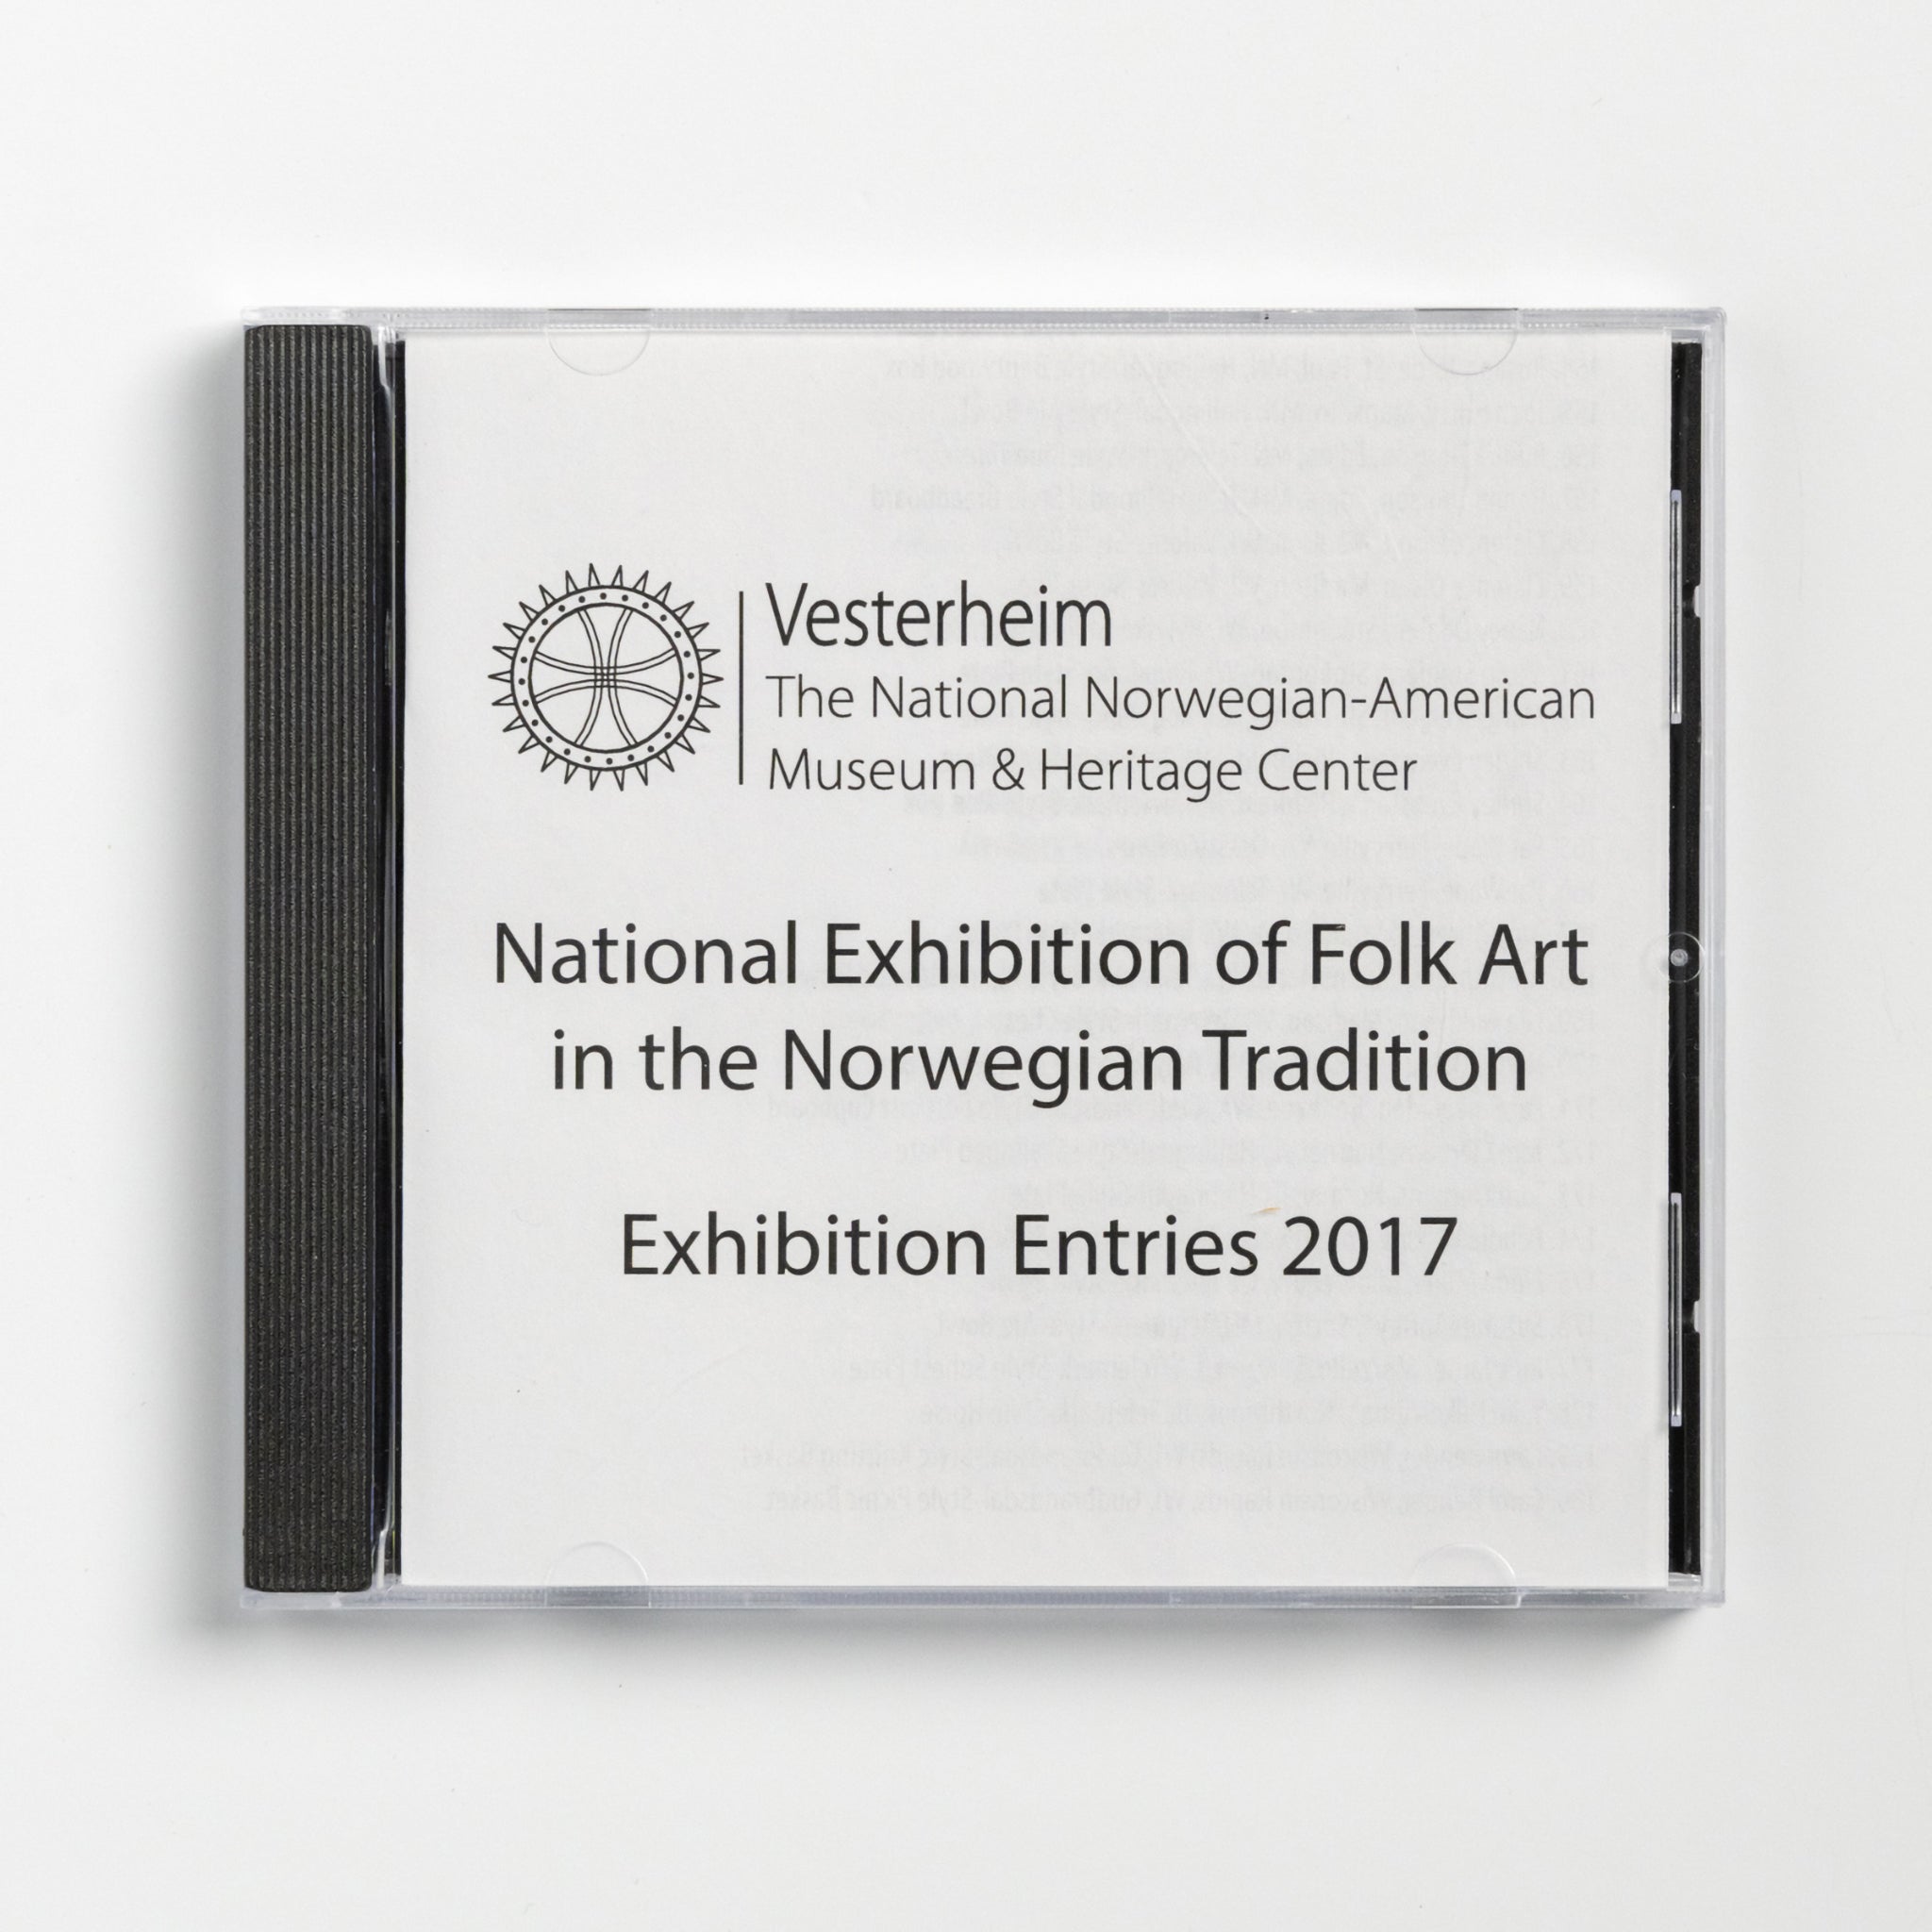 2017 National Exhibition of Folk Art in the Norwegian Tradition - CD of Images